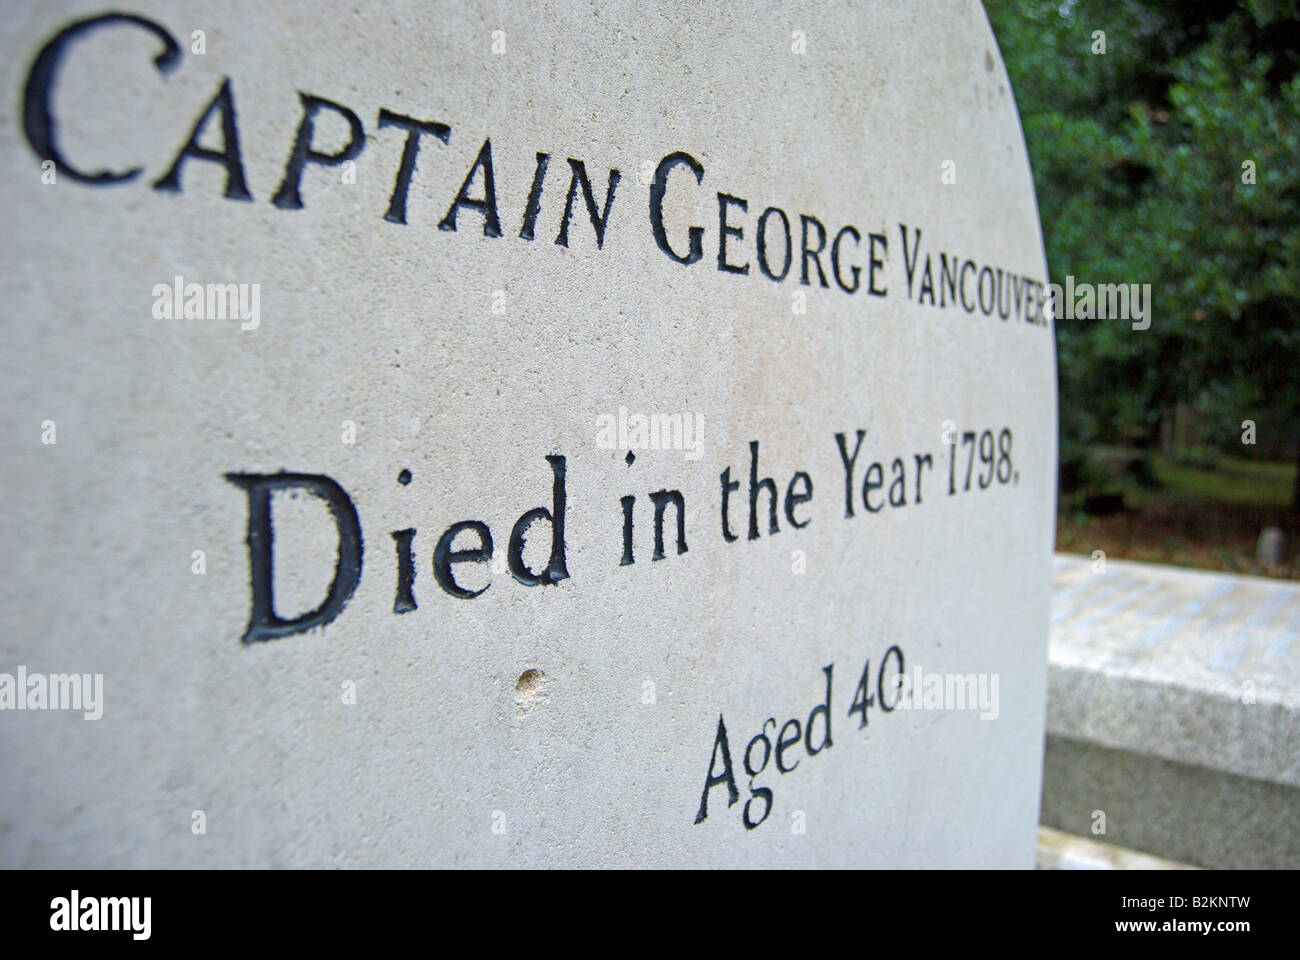 detail of the grave of british naval officer captain george vancouver at the church of st peter, petersham, surrey, england Stock Photo